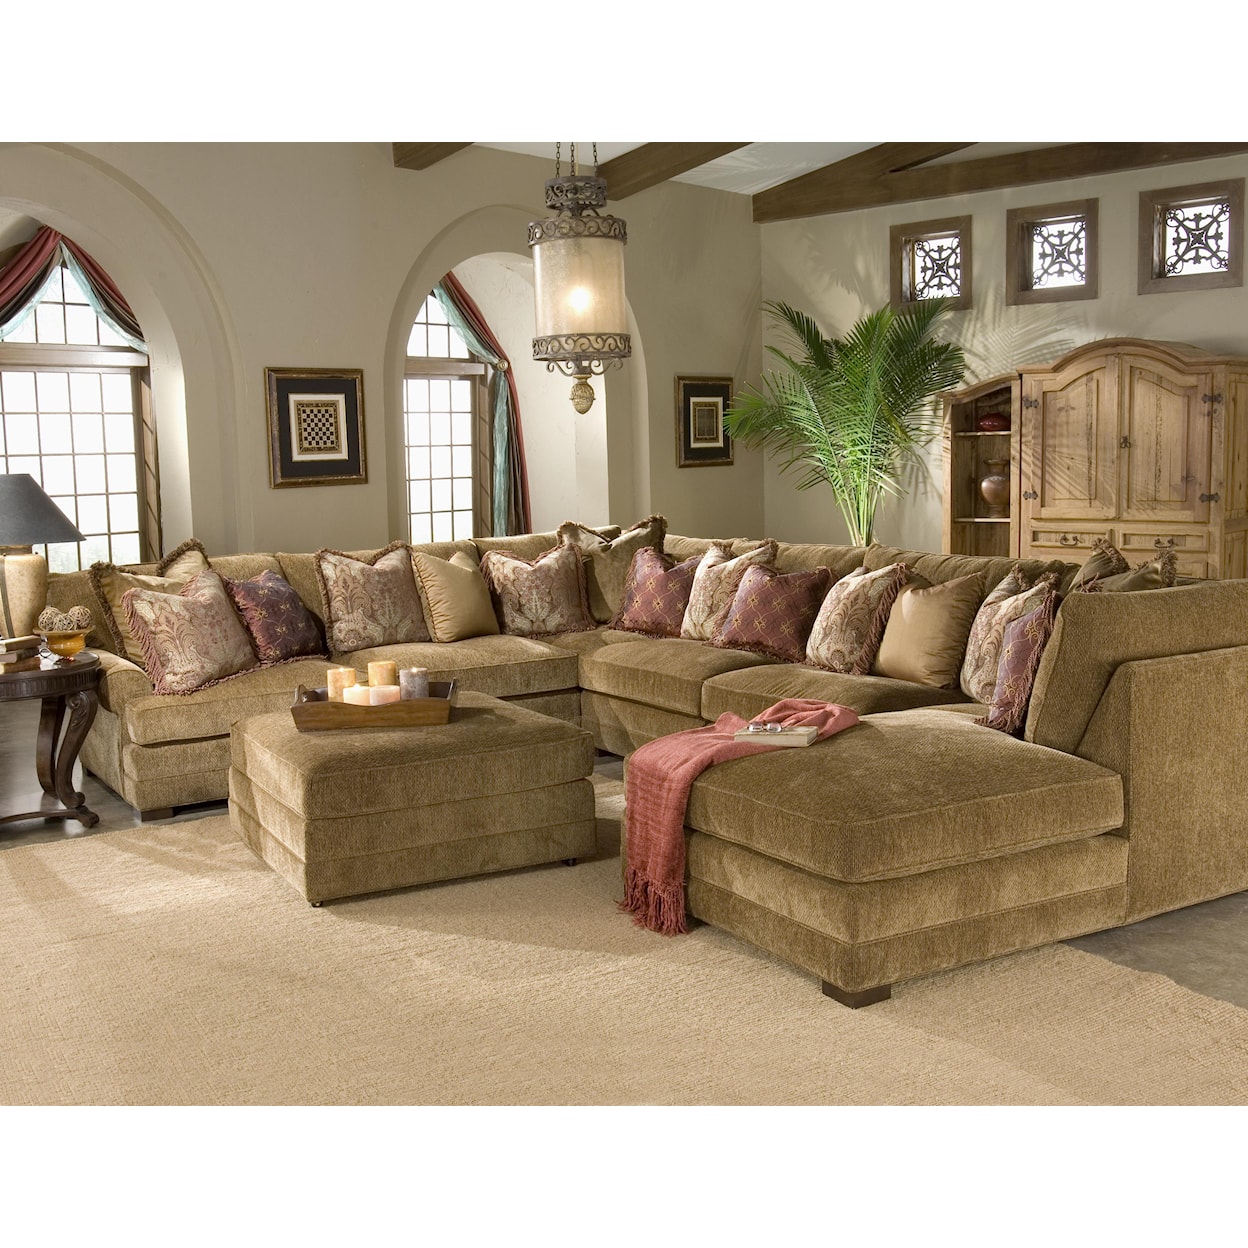 King Hickory Casbah Sectional Sofa